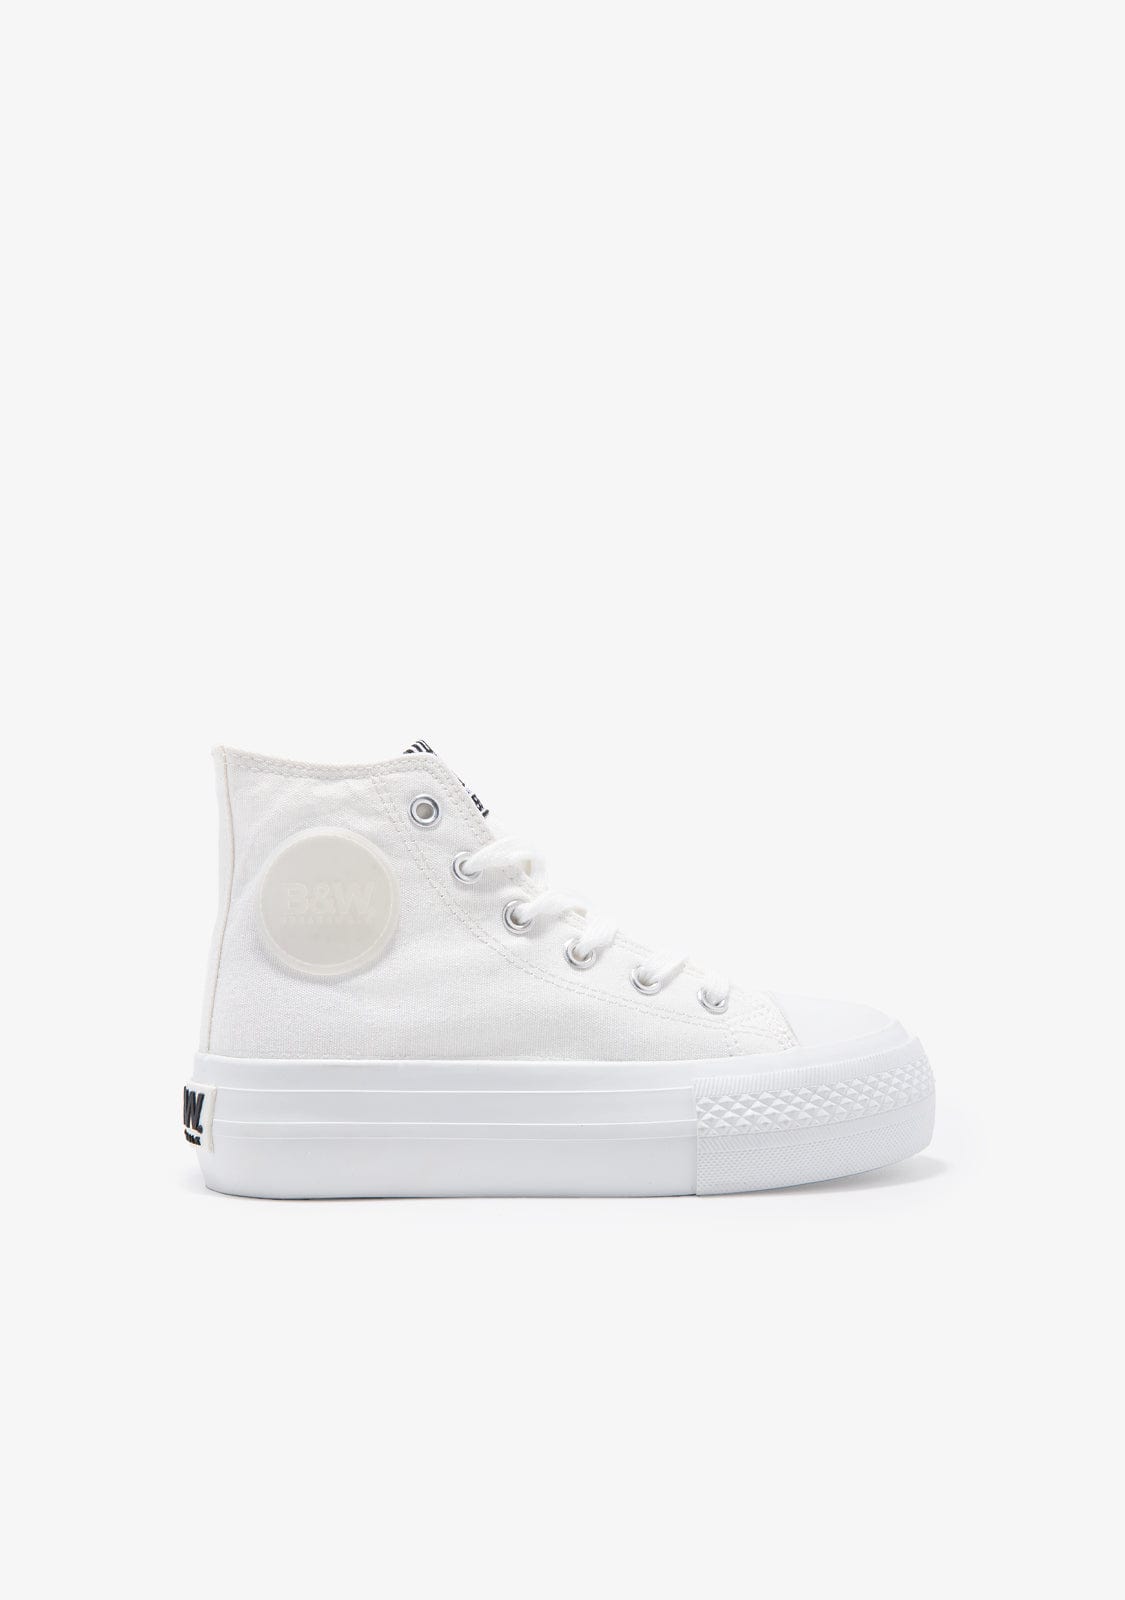 Canvas Platform High Top Sneakers White